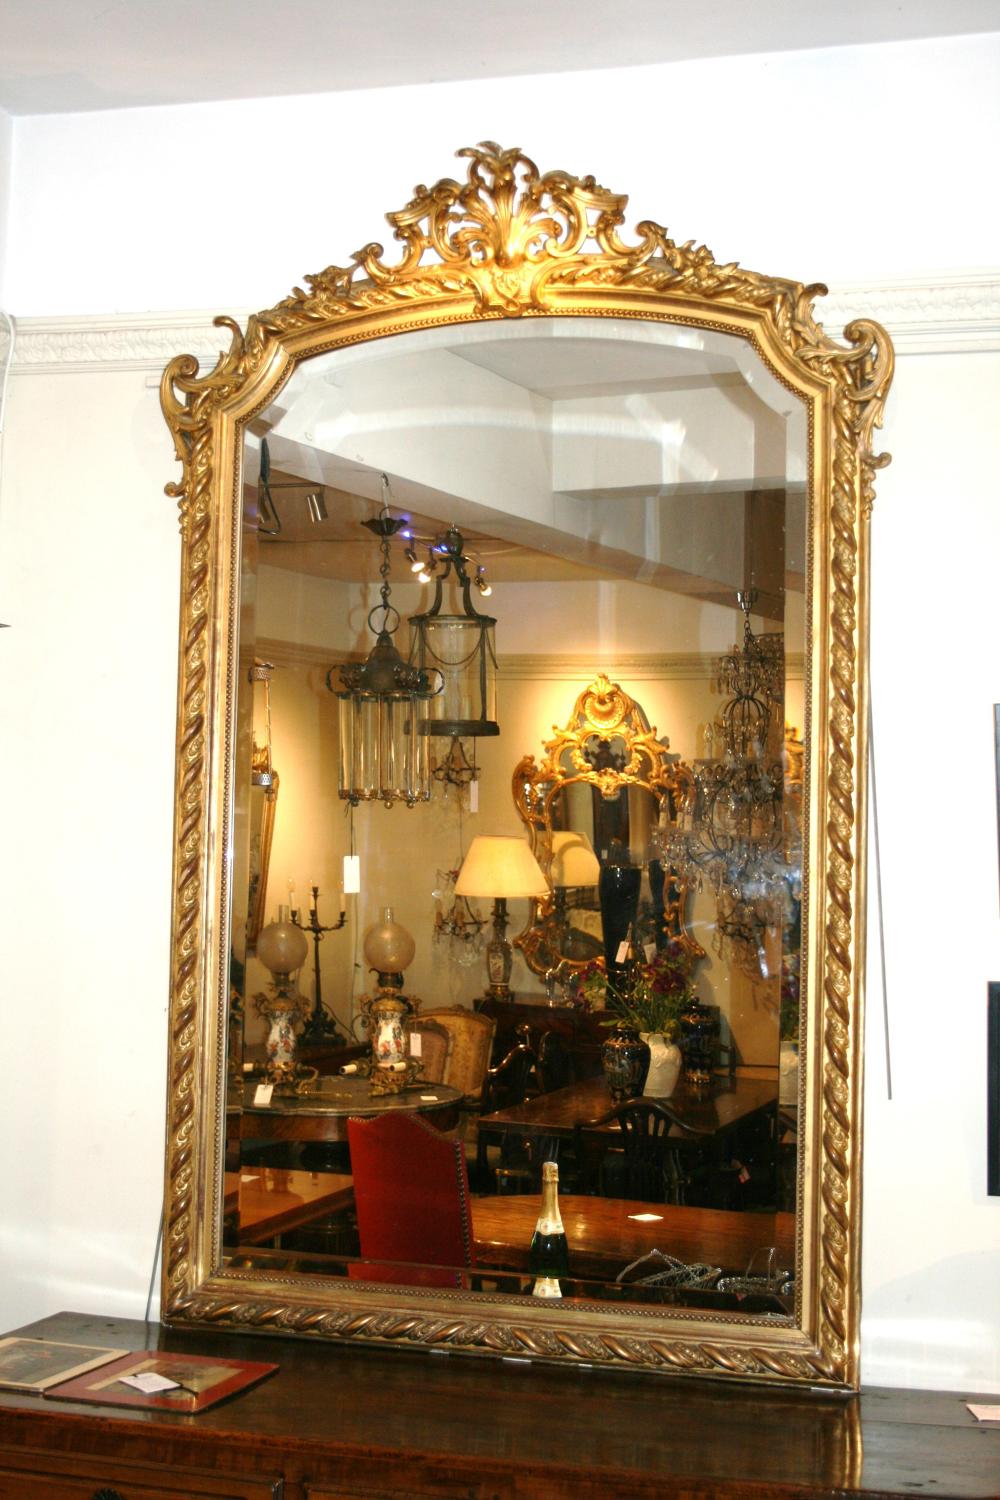 Large French 19th Century Gilt Mirror